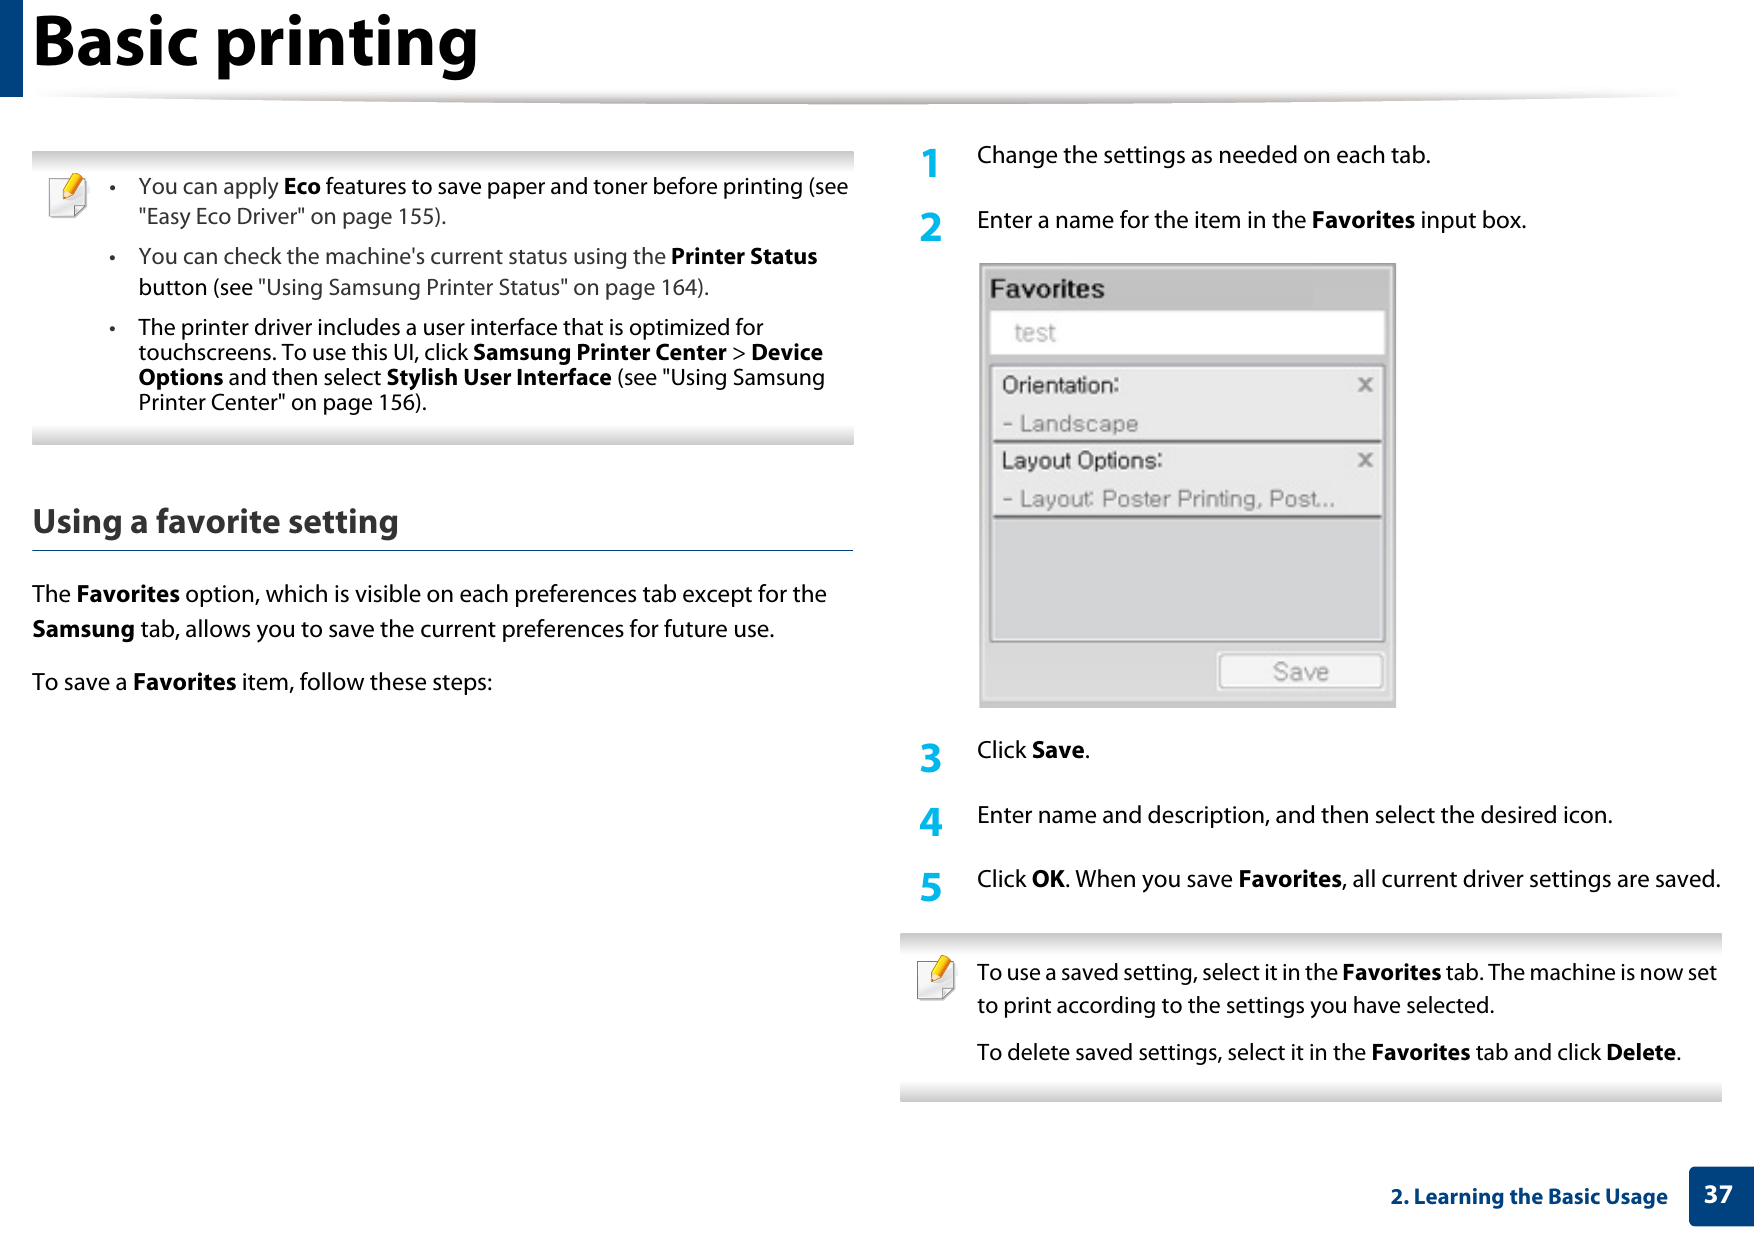 Basic printing372. Learning the Basic Usage •You can apply Eco features to save paper and toner before printing (see &quot;Easy Eco Driver&quot; on page 155).• You can check the machine&apos;s current status using the Printer Status button (see &quot;Using Samsung Printer Status&quot; on page 164).•The printer driver includes a user interface that is optimized for touchscreens. To use this UI, click Samsung Printer Center &gt; Device Options and then select Stylish User Interface (see &quot;Using Samsung Printer Center&quot; on page 156). Using a favorite settingThe Favorites option, which is visible on each preferences tab except for the Samsung tab, allows you to save the current preferences for future use.To save a Favorites item, follow these steps:1Change the settings as needed on each tab. 2  Enter a name for the item in the Favorites input box.3  Click Save. 4  Enter name and description, and then select the desired icon.5  Click OK. When you save Favorites, all current driver settings are saved. To use a saved setting, select it in the Favorites tab. The machine is now set to print according to the settings you have selected.To delete saved settings, select it in the Favorites tab and click Delete.  